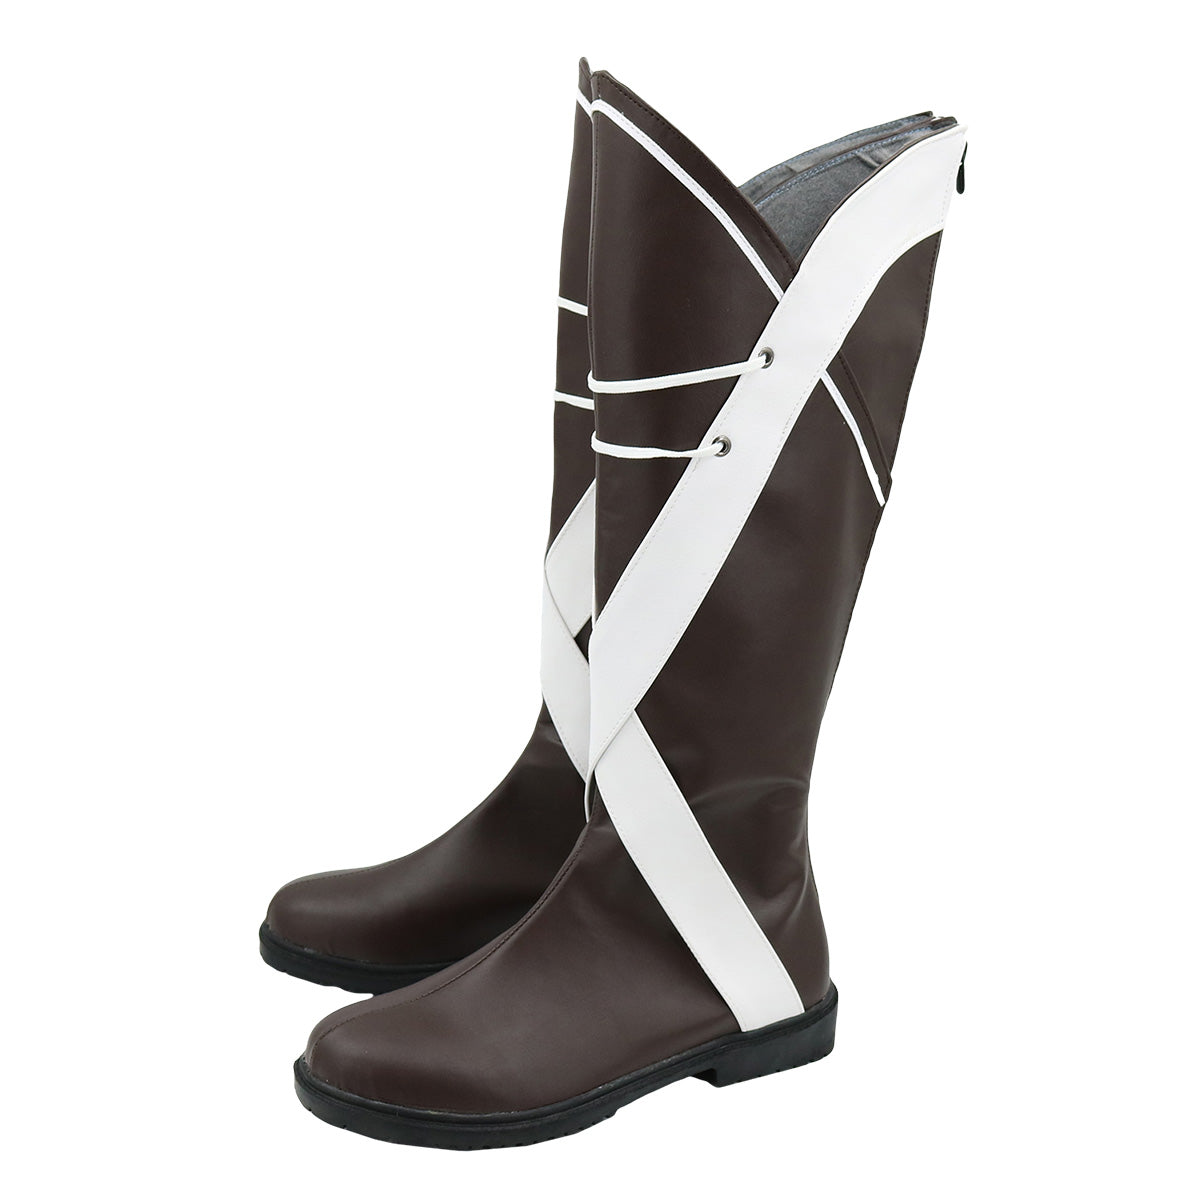 Arknights Texas Hiver Noir Cosplay Chaussures